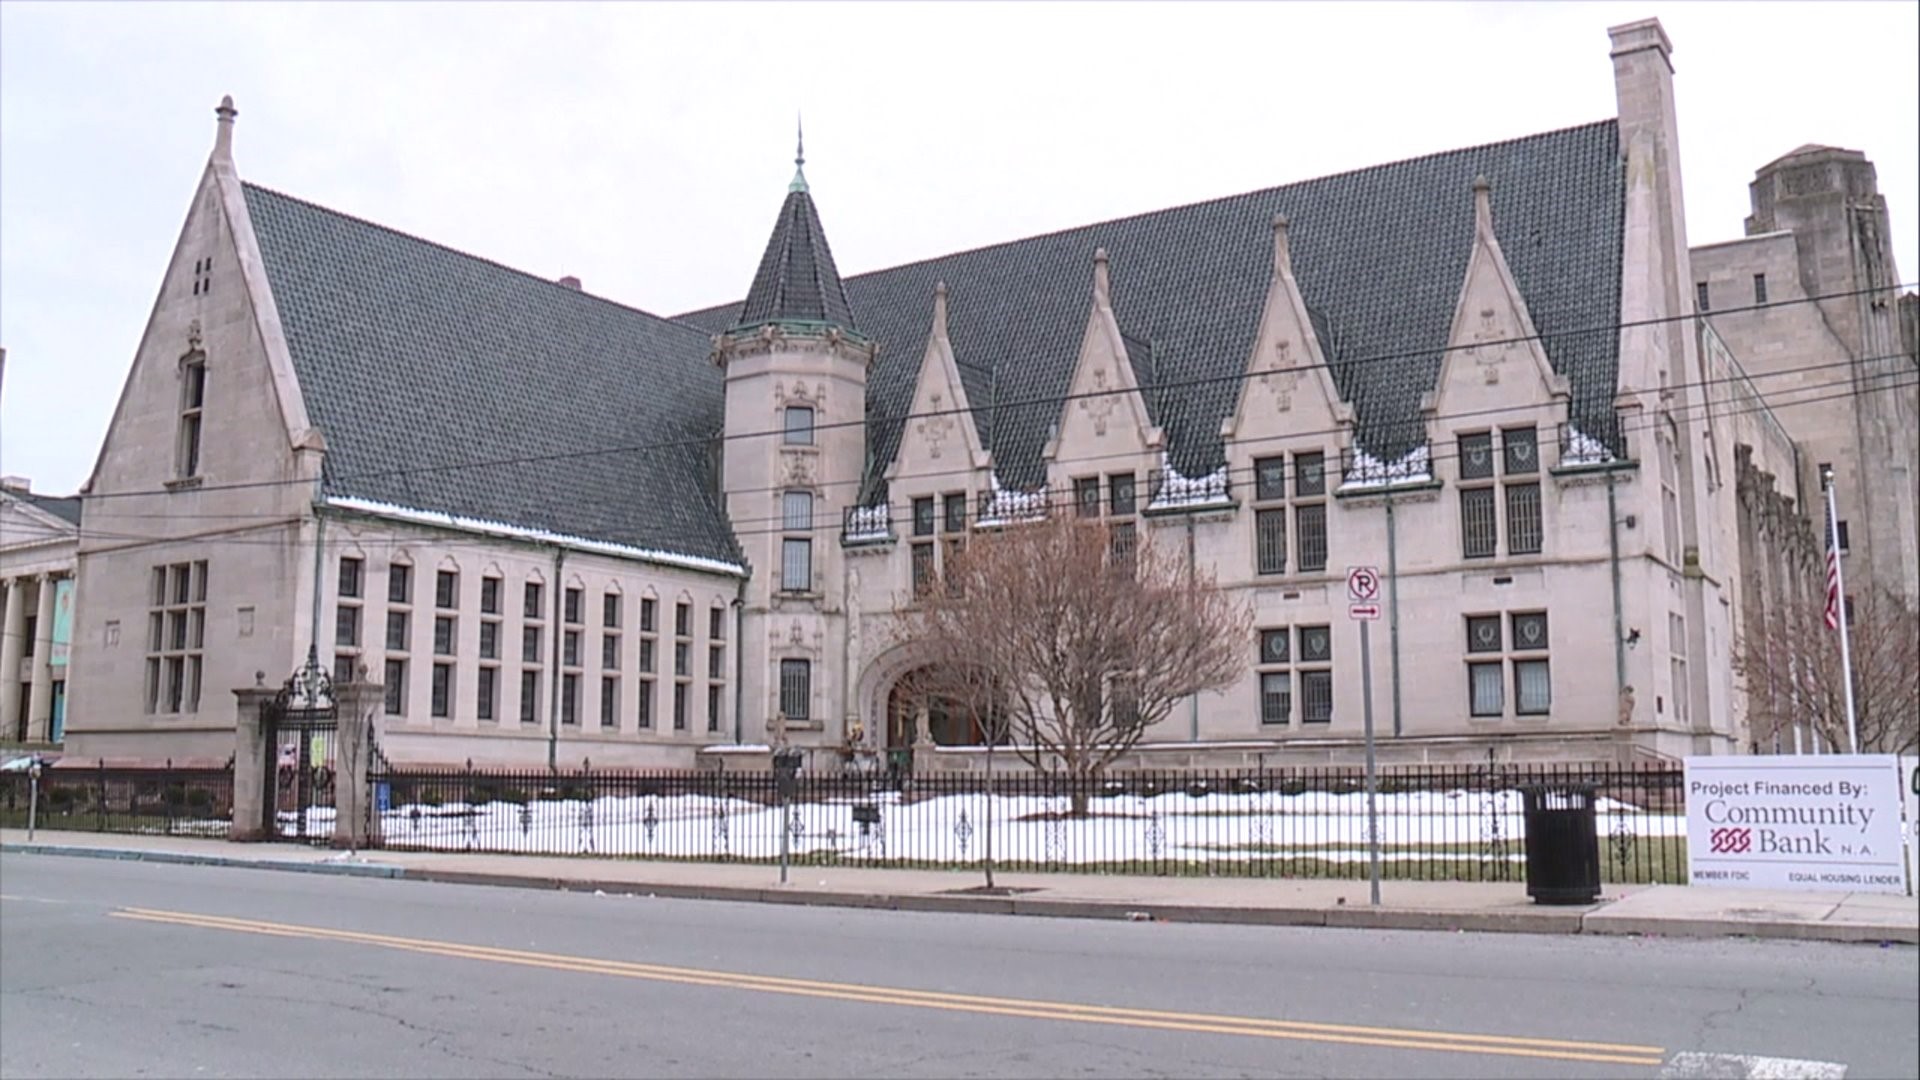 Library in Scranton Set to Reopen After Renovations